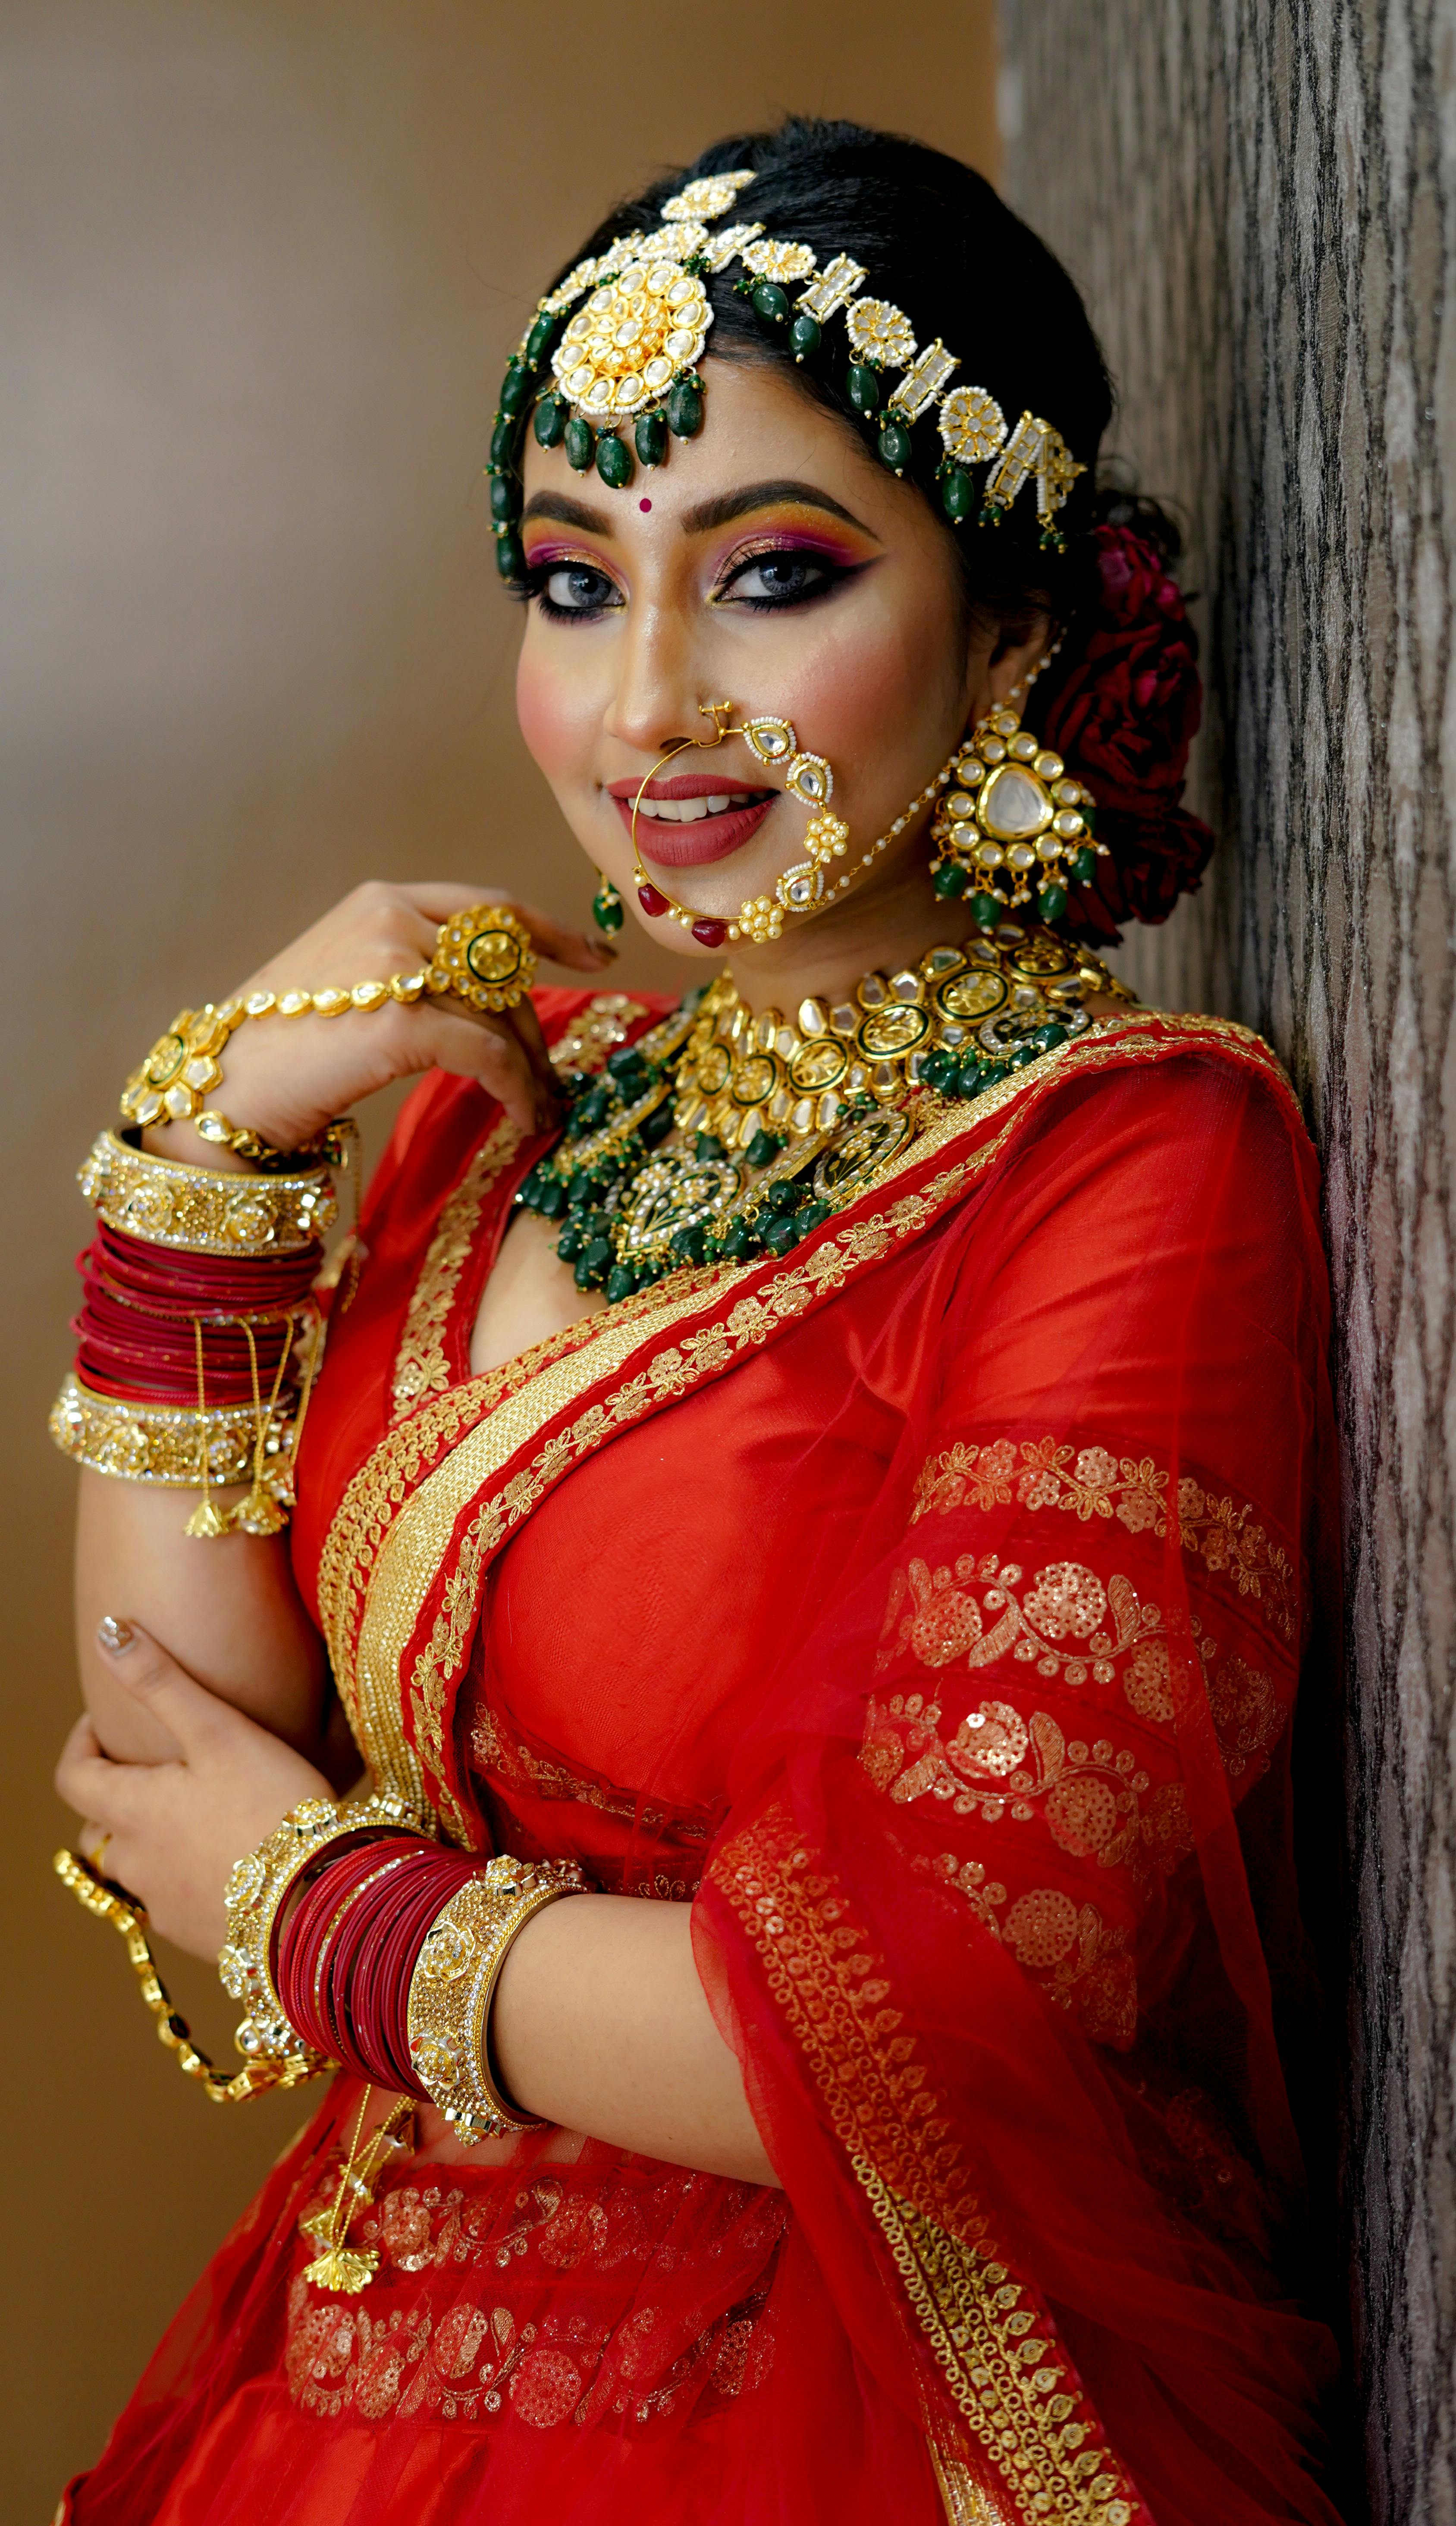 Young Woman in Traditional Indian Wedding Dress · Free Stock Photo